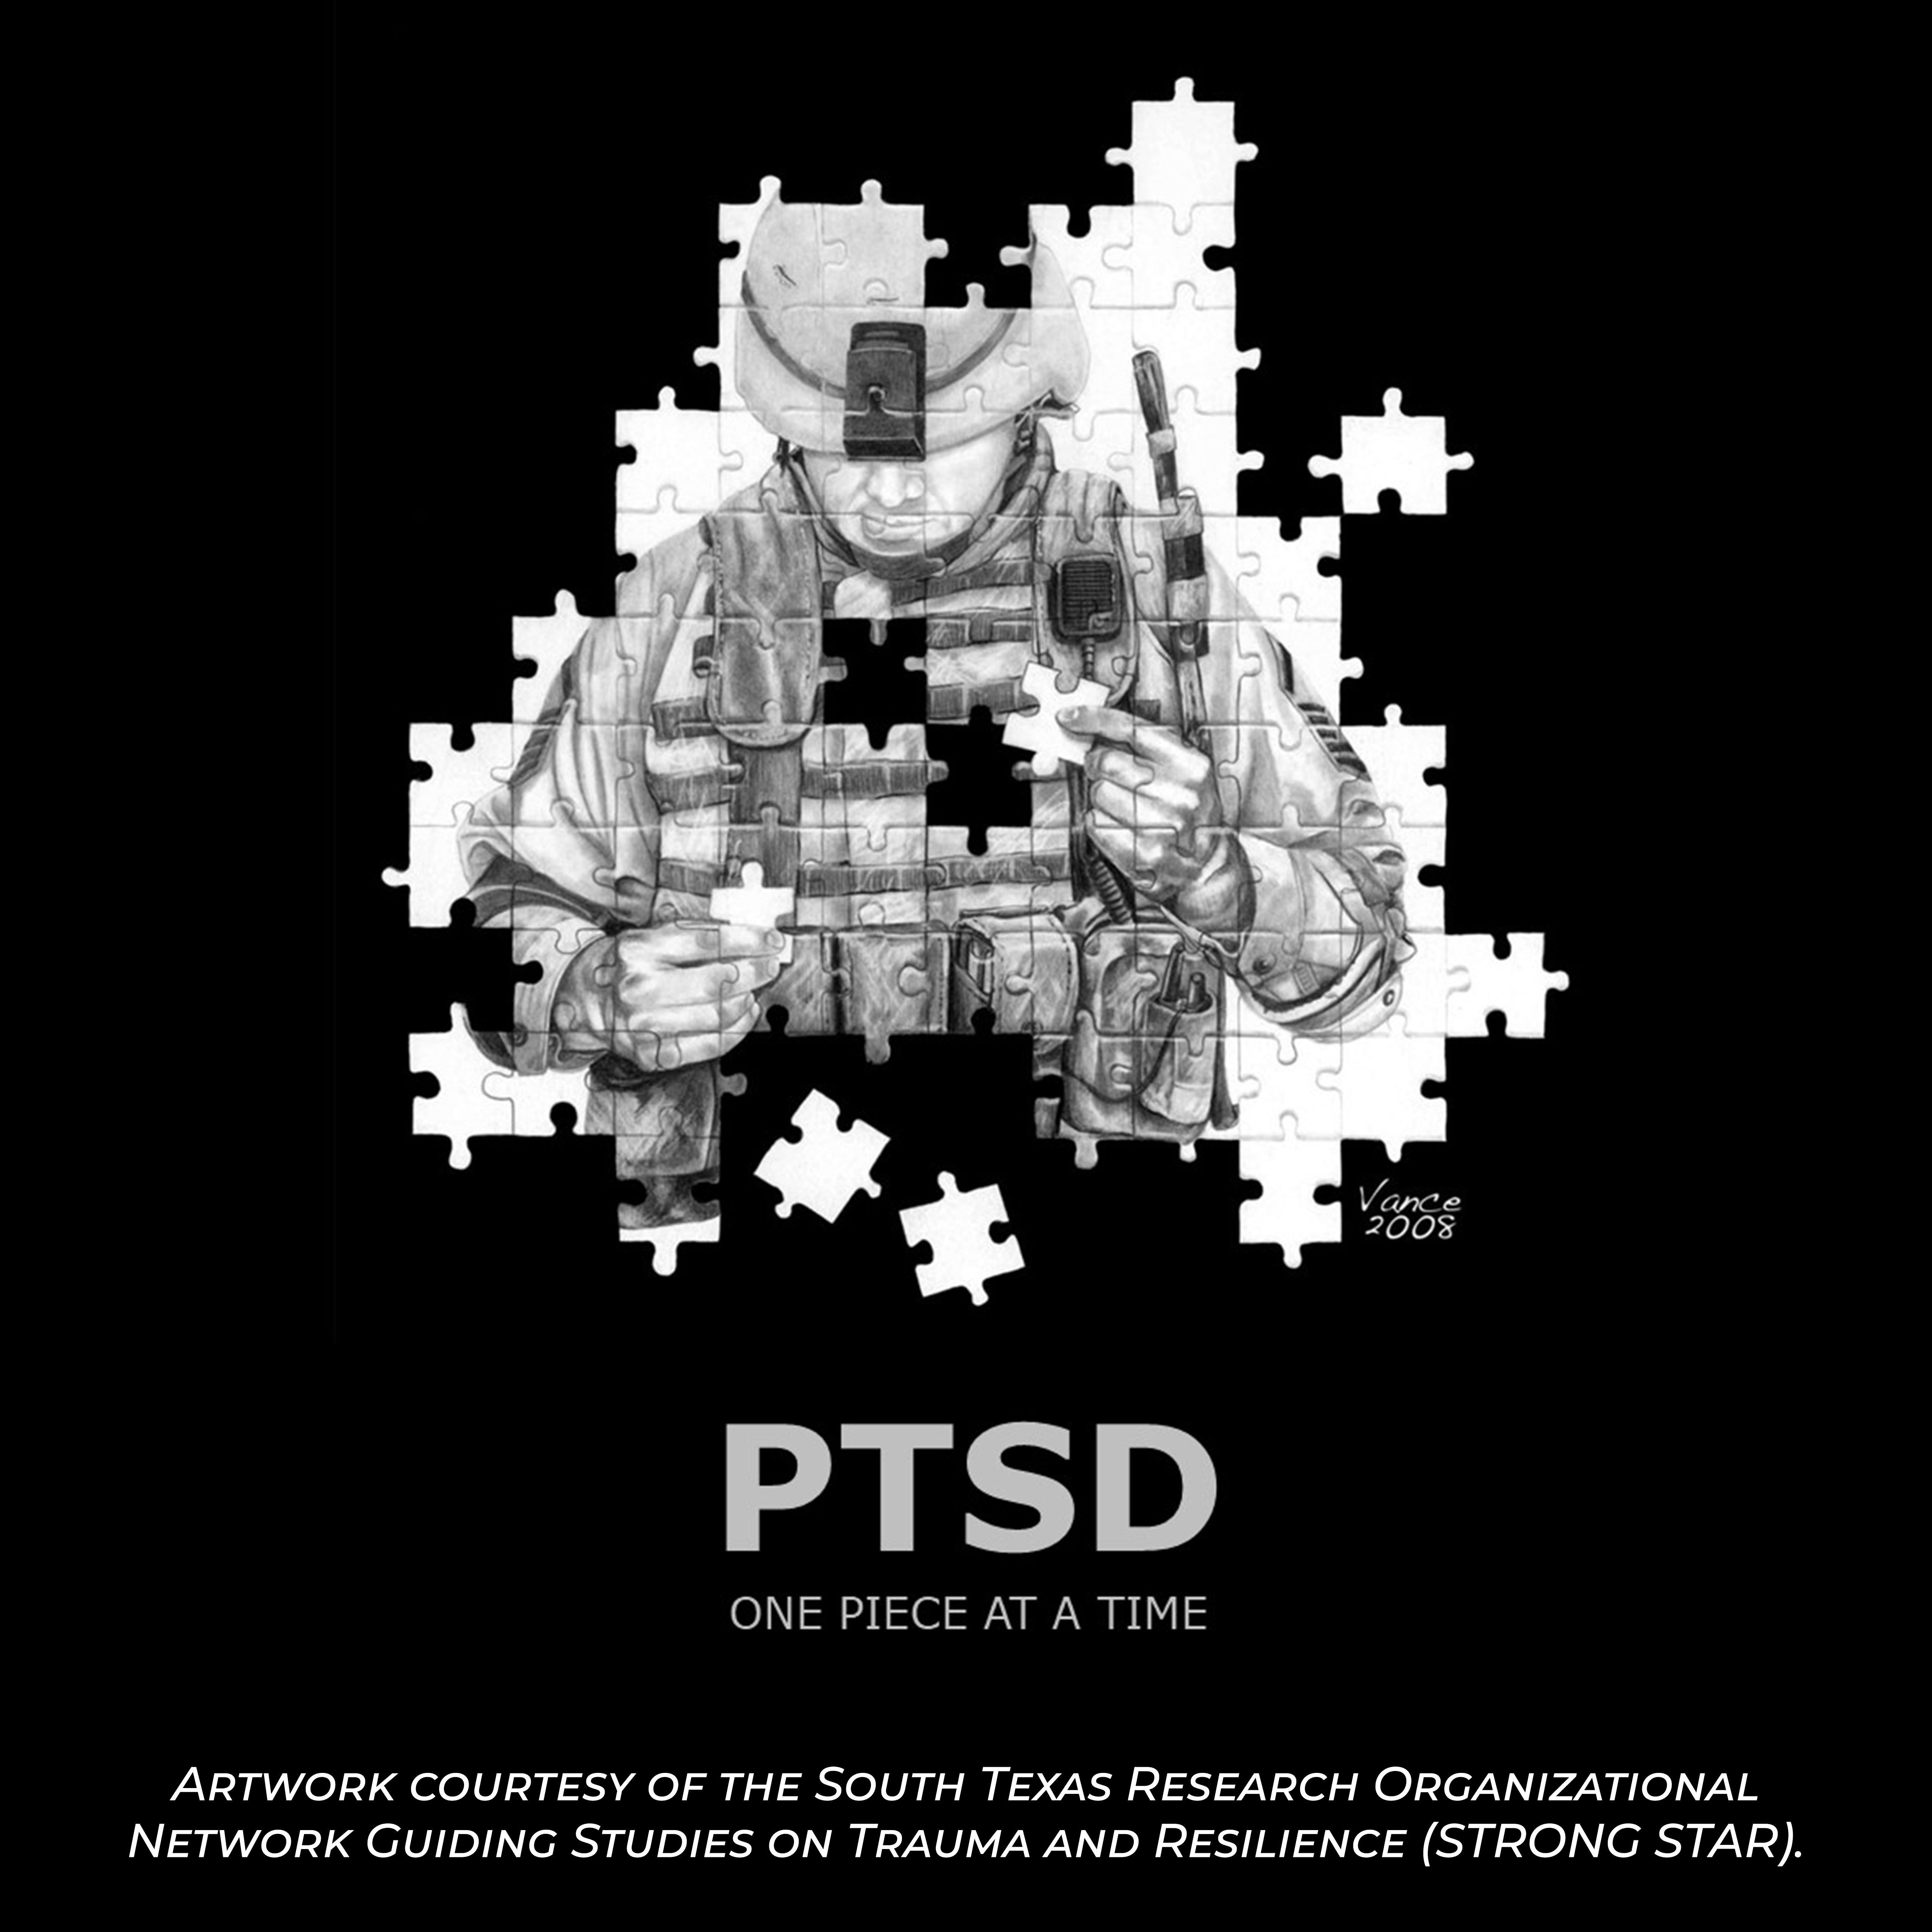 PTSD - One Piece at a Time